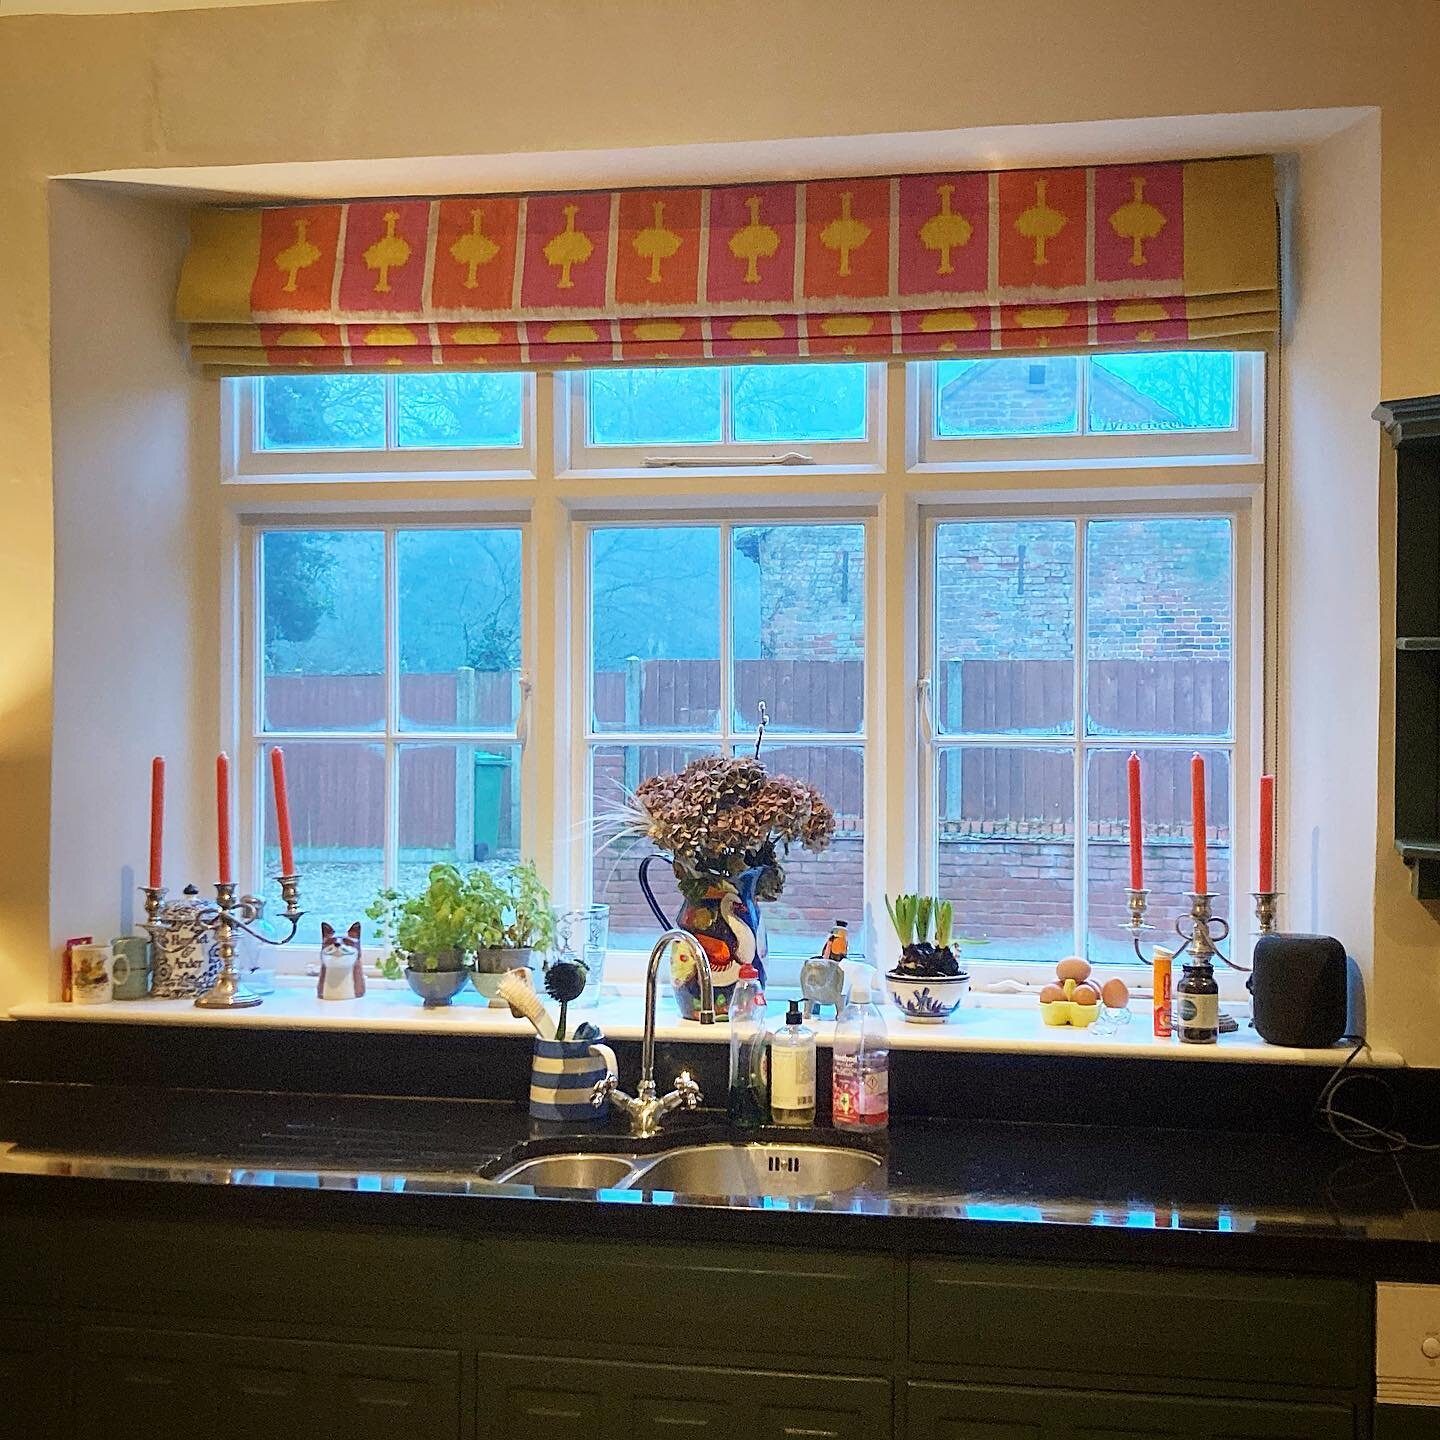 Colourful cooking in this kitchen! Fabulous pink and orange @christopherfarrcloth Ozone fabric with the bordered trim in @romo, looking gorgeous against the hunter green kitchen units 💚💗🧡💛 #hvjinteriors #christopherfarrcloth #romo #kitchen #blind